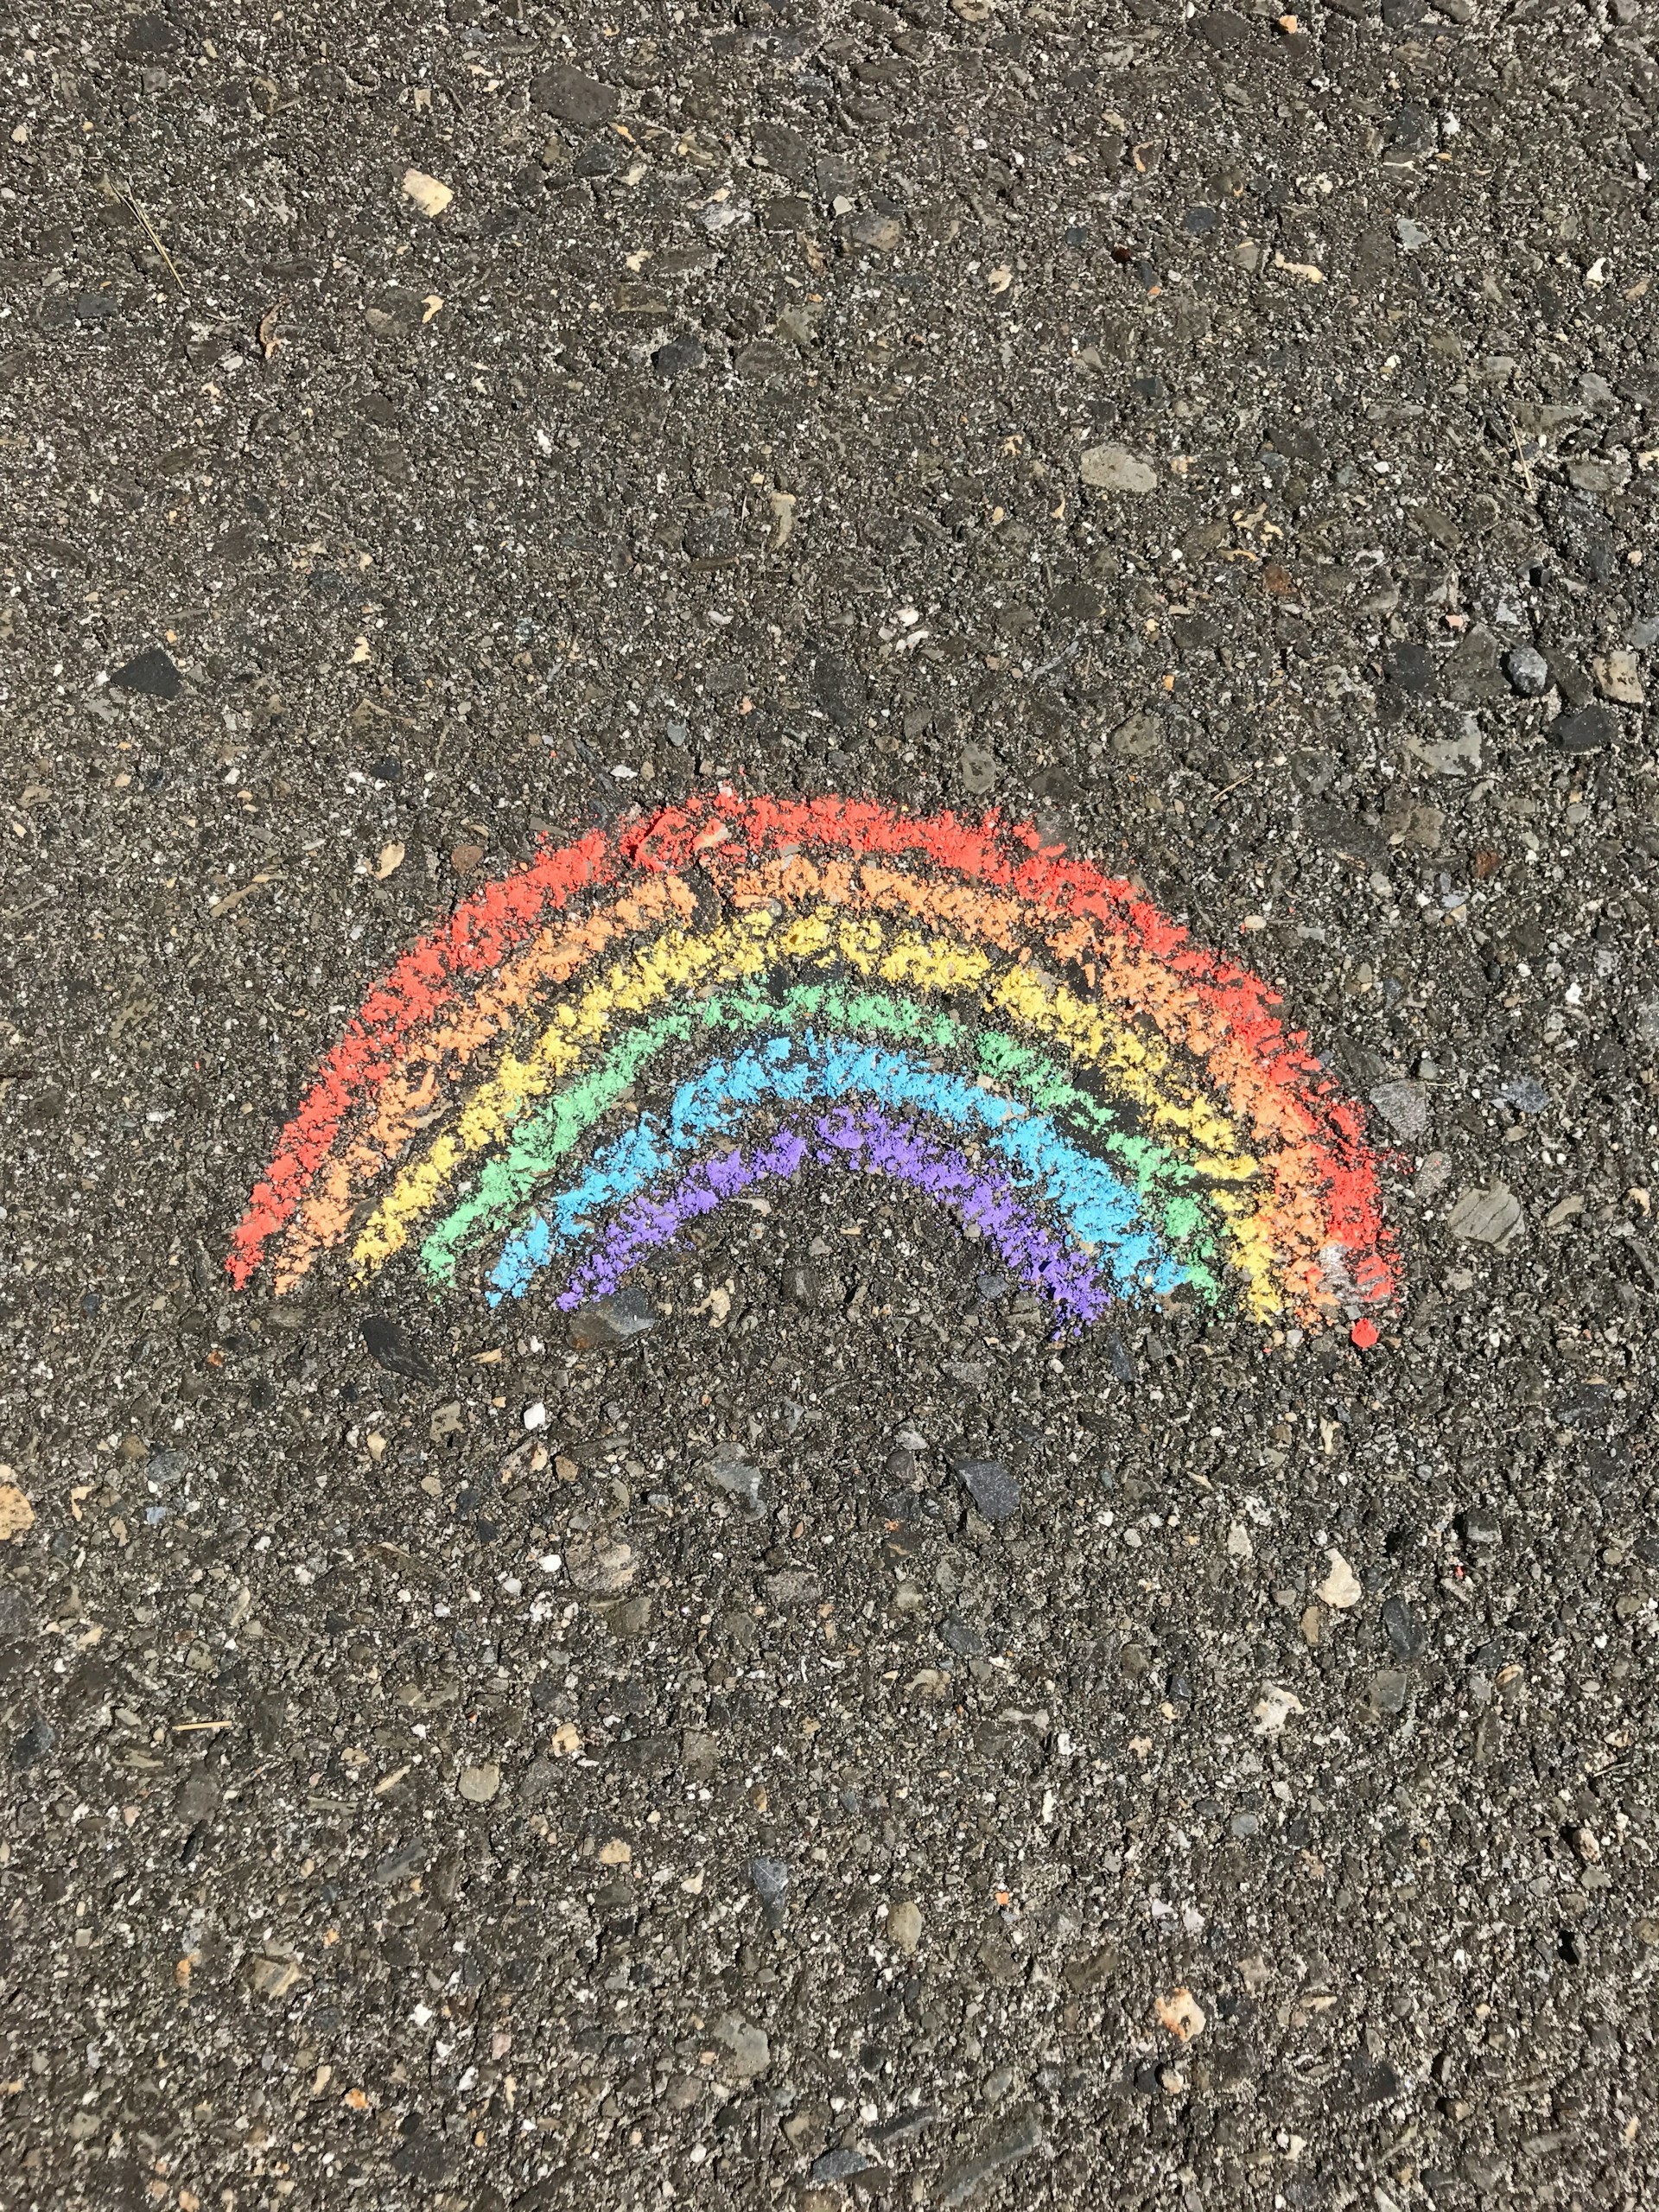 Photo of a simple sidwalk chalk drawing of a rainbow